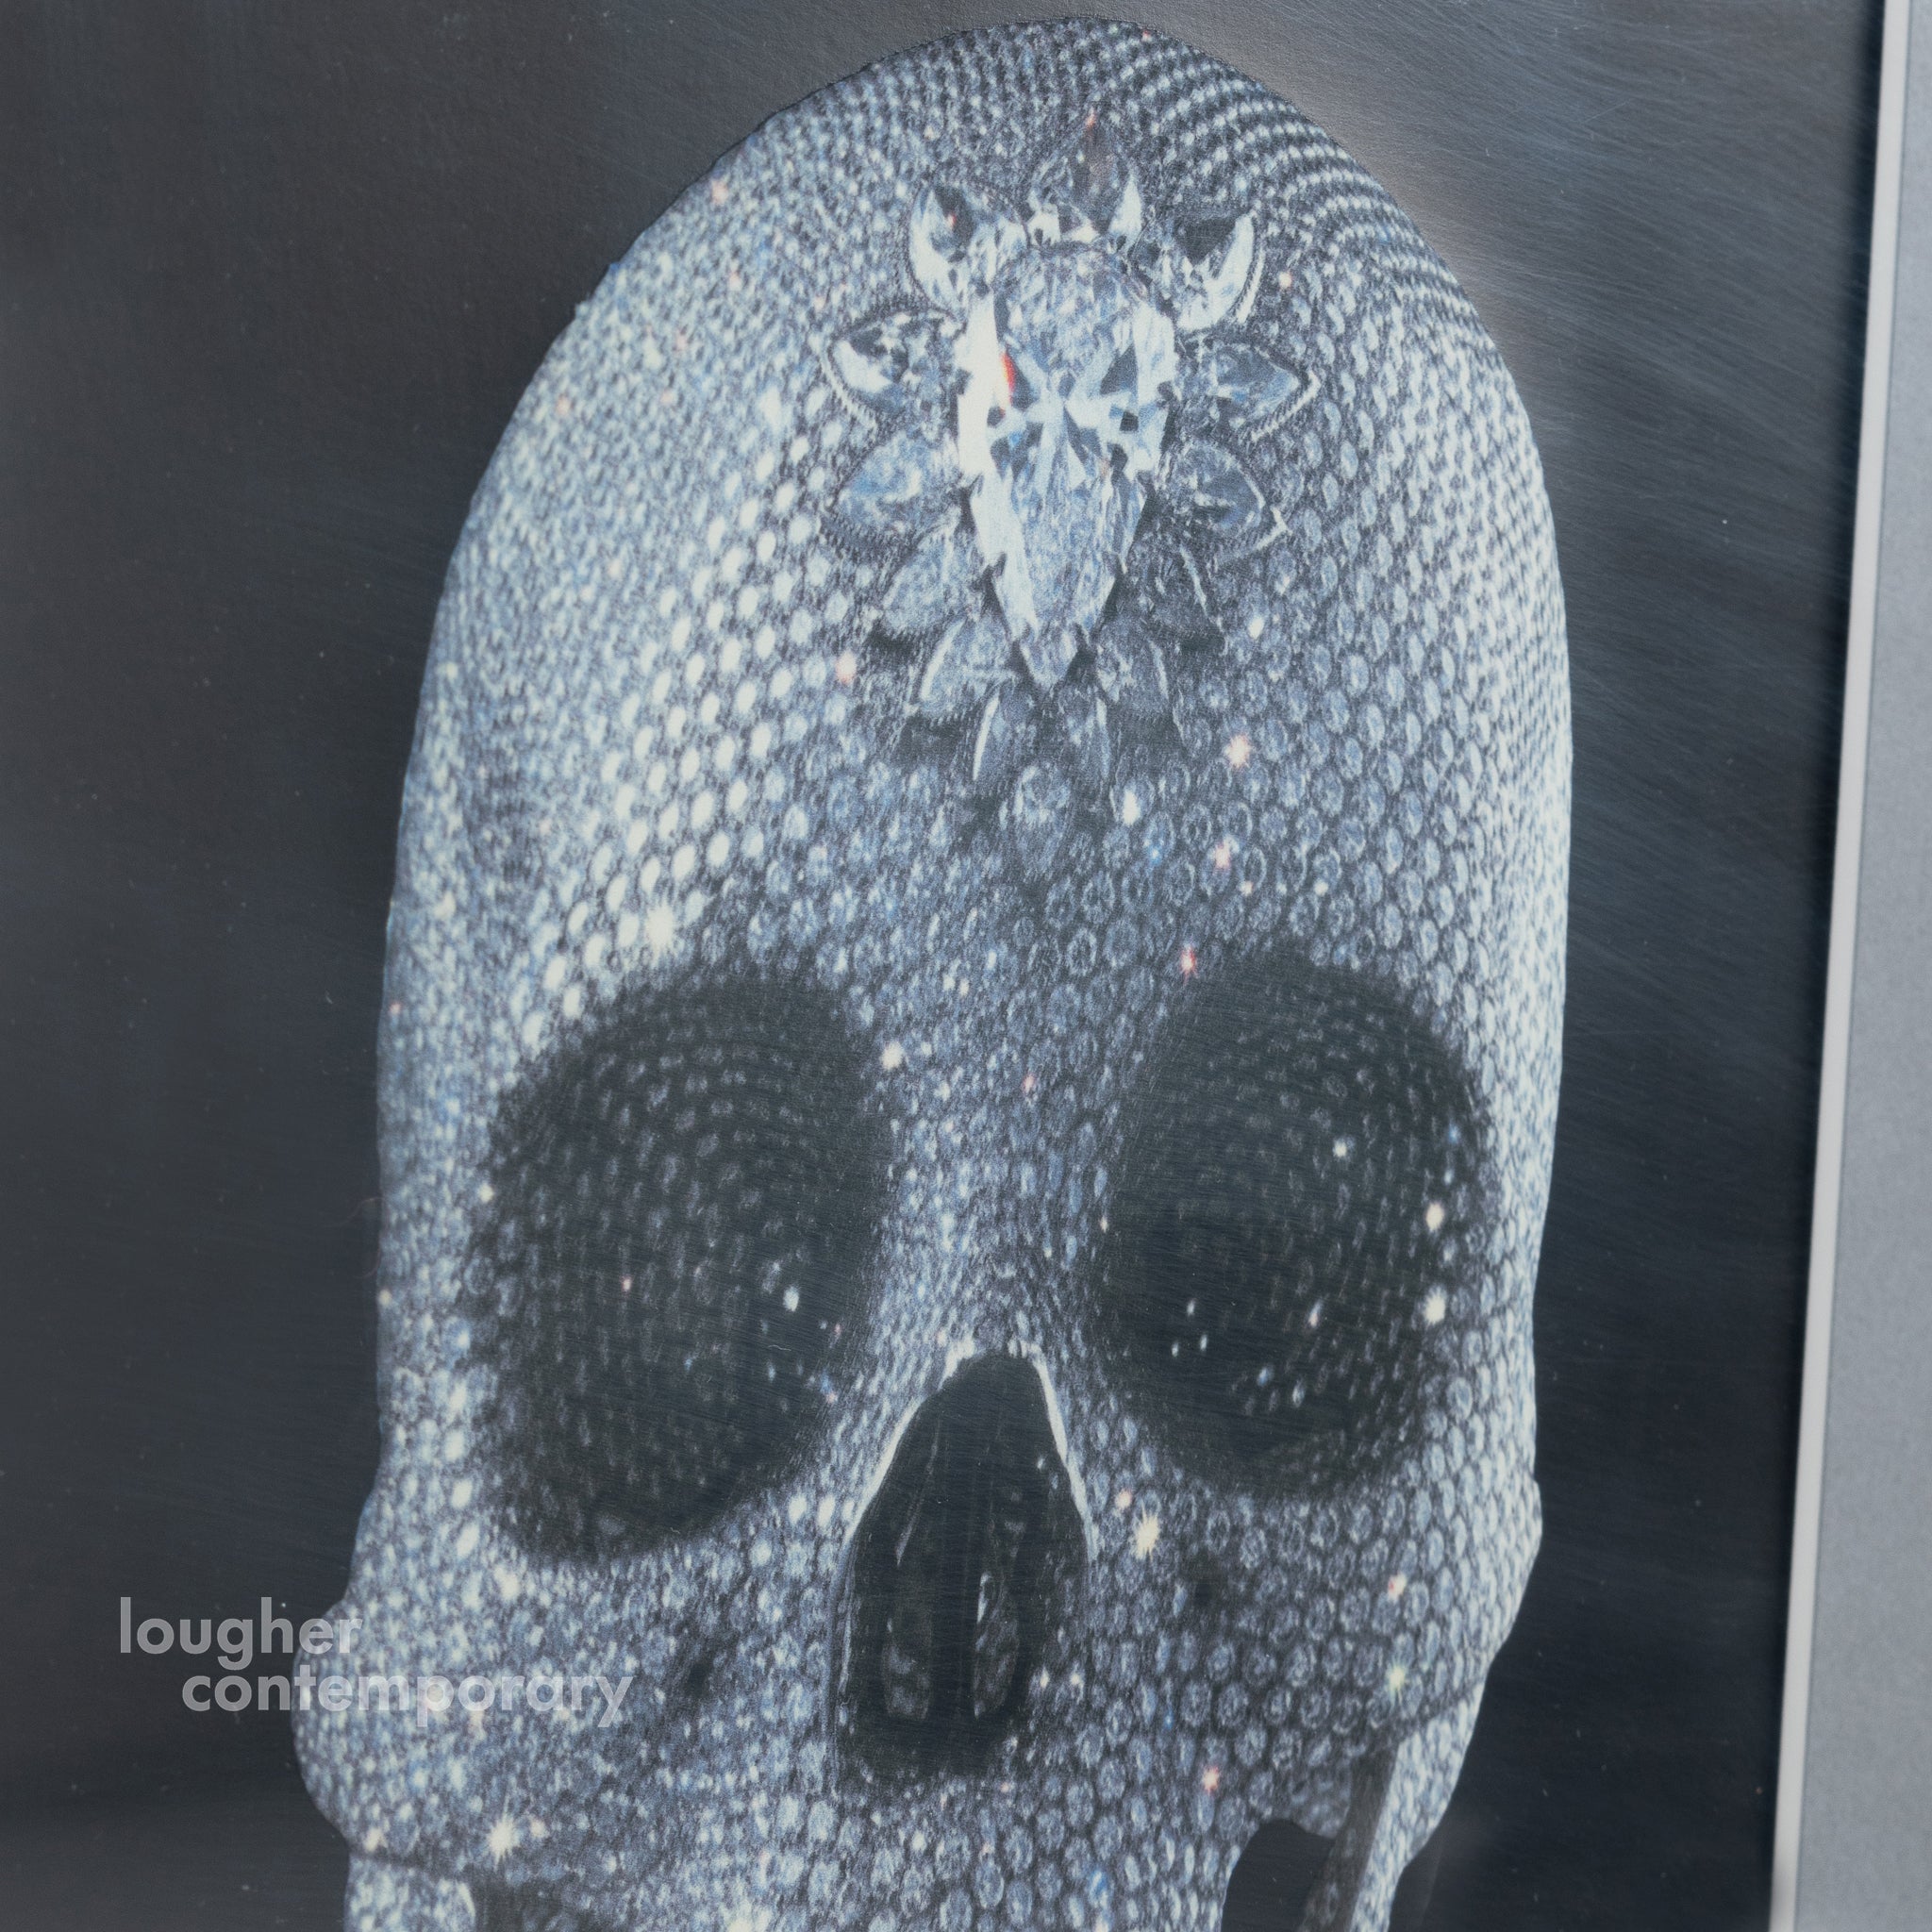 Damien Hirst, For the Love of God (Believe), 2007 For Sale | Lougher Contemporary 